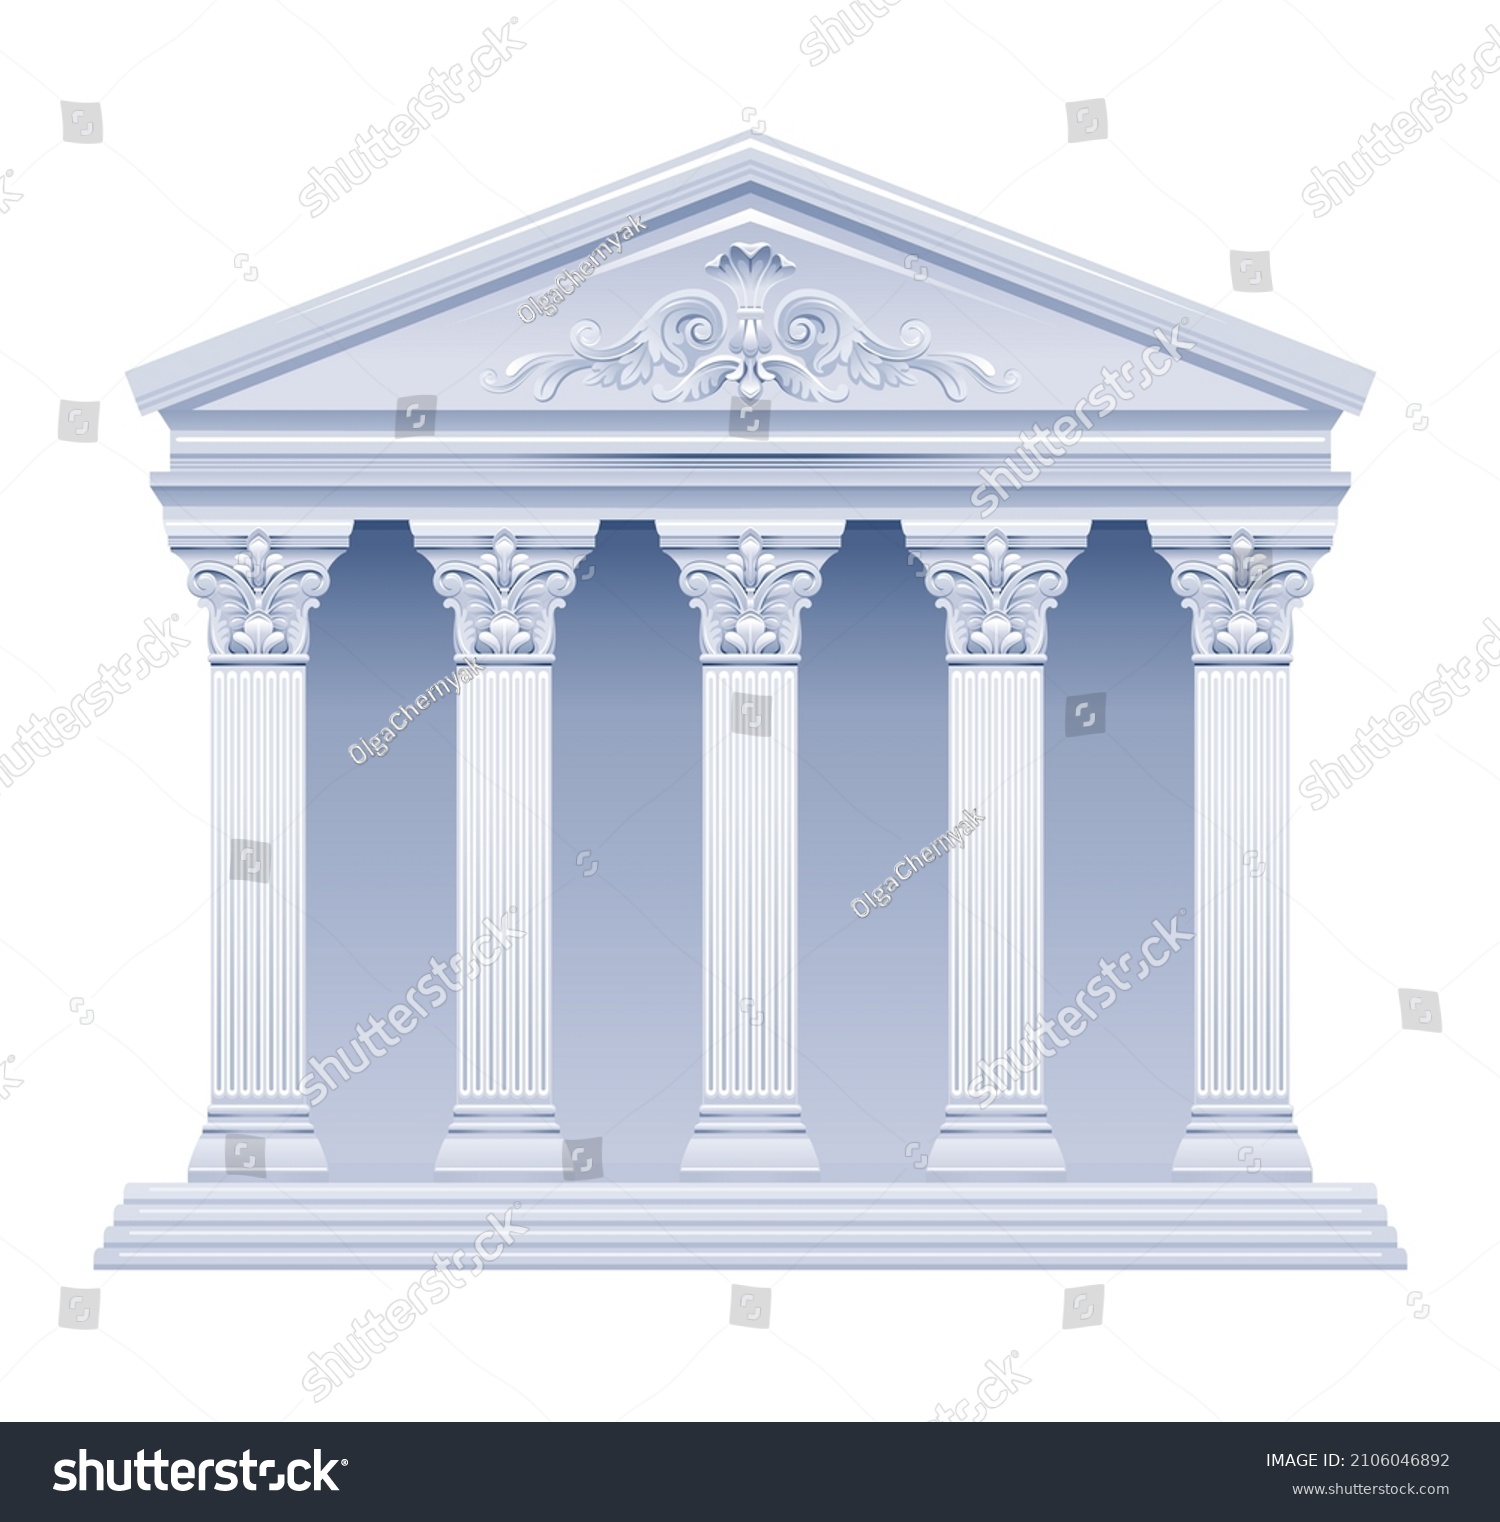 SVG of Greek temple building vector. Greek Roman pillar architecture. Ancient column illustration from Greece, Rome. Marble antique house - parthenon acropolis temple court bank. 3d icon on white baackground svg